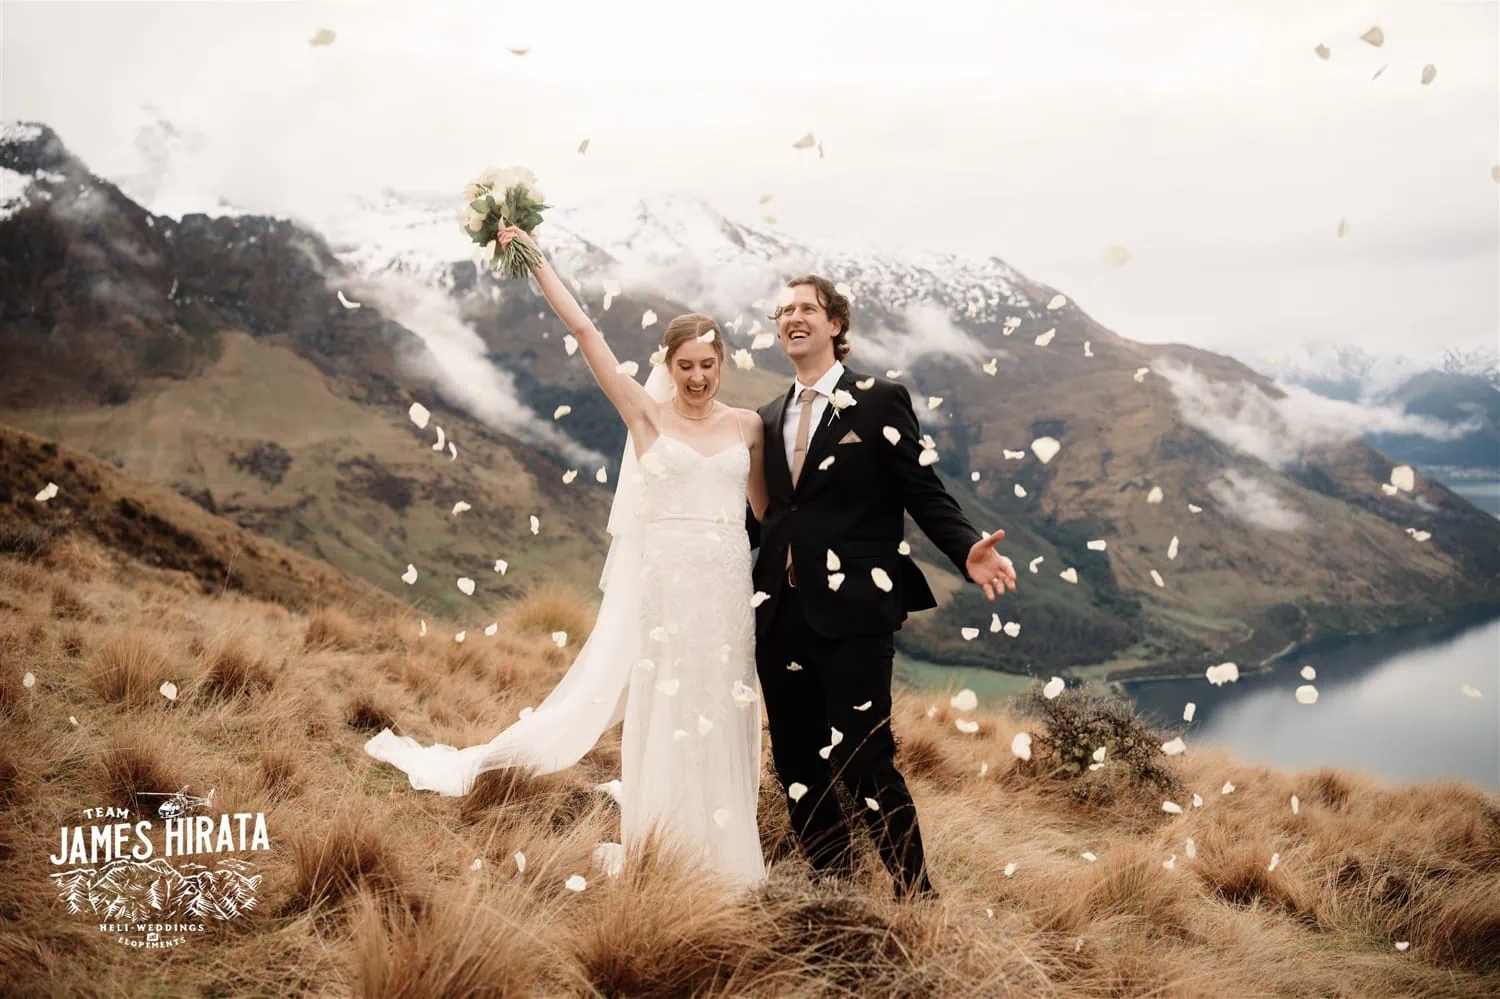 Hannah and Ross eloping on top of a mountain in Queenstown, New Zealand.